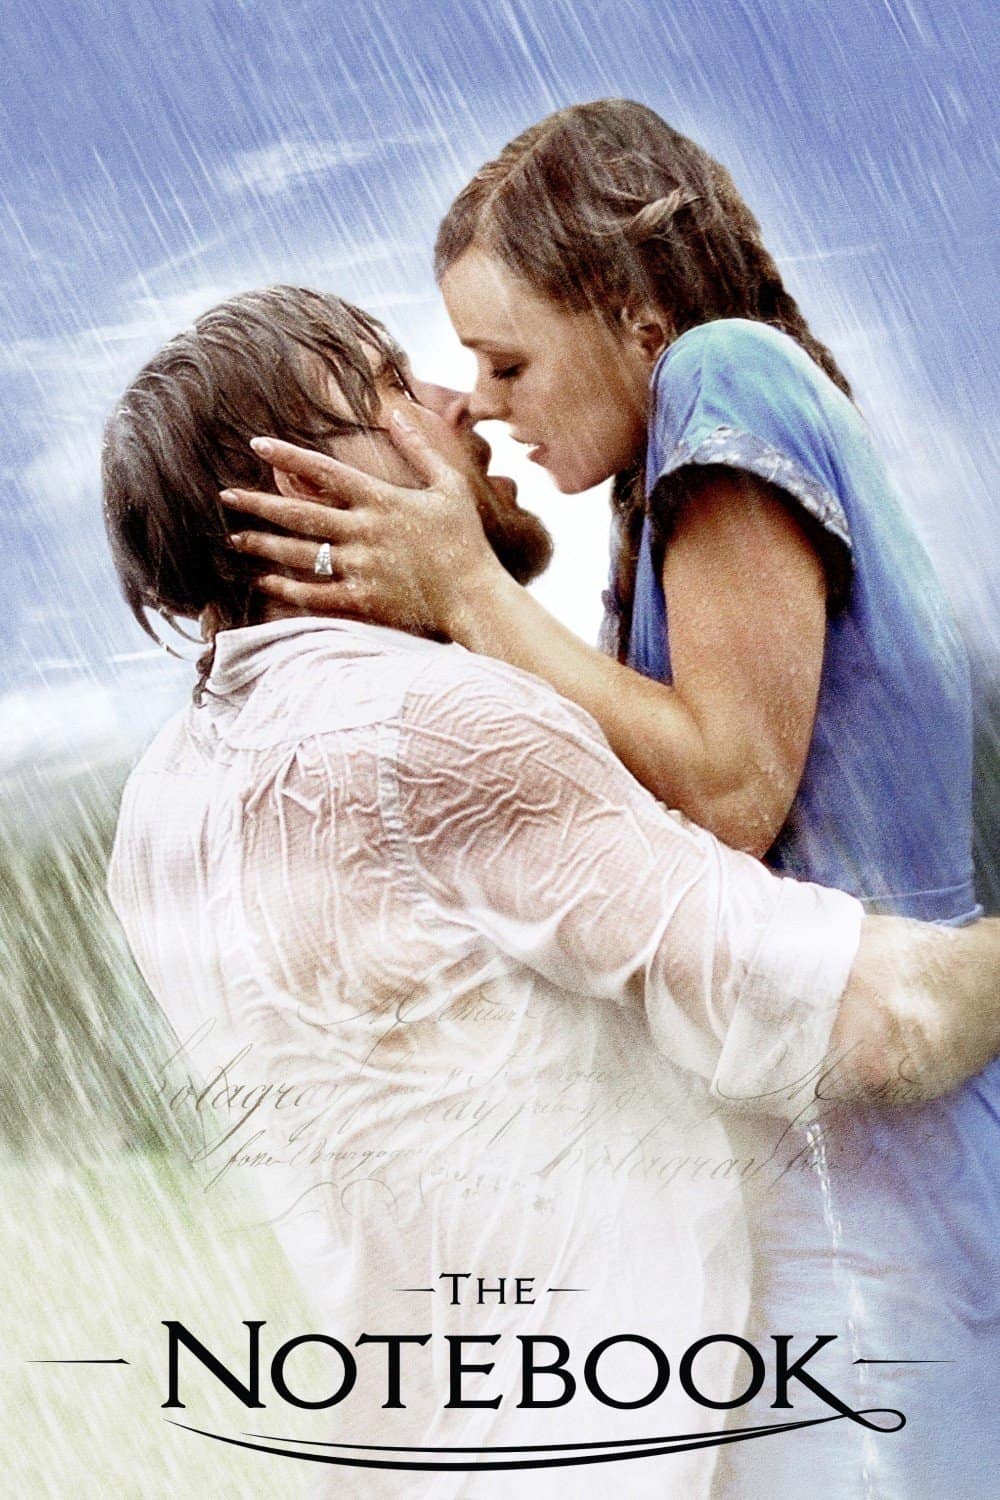 The Notebook, 2004 